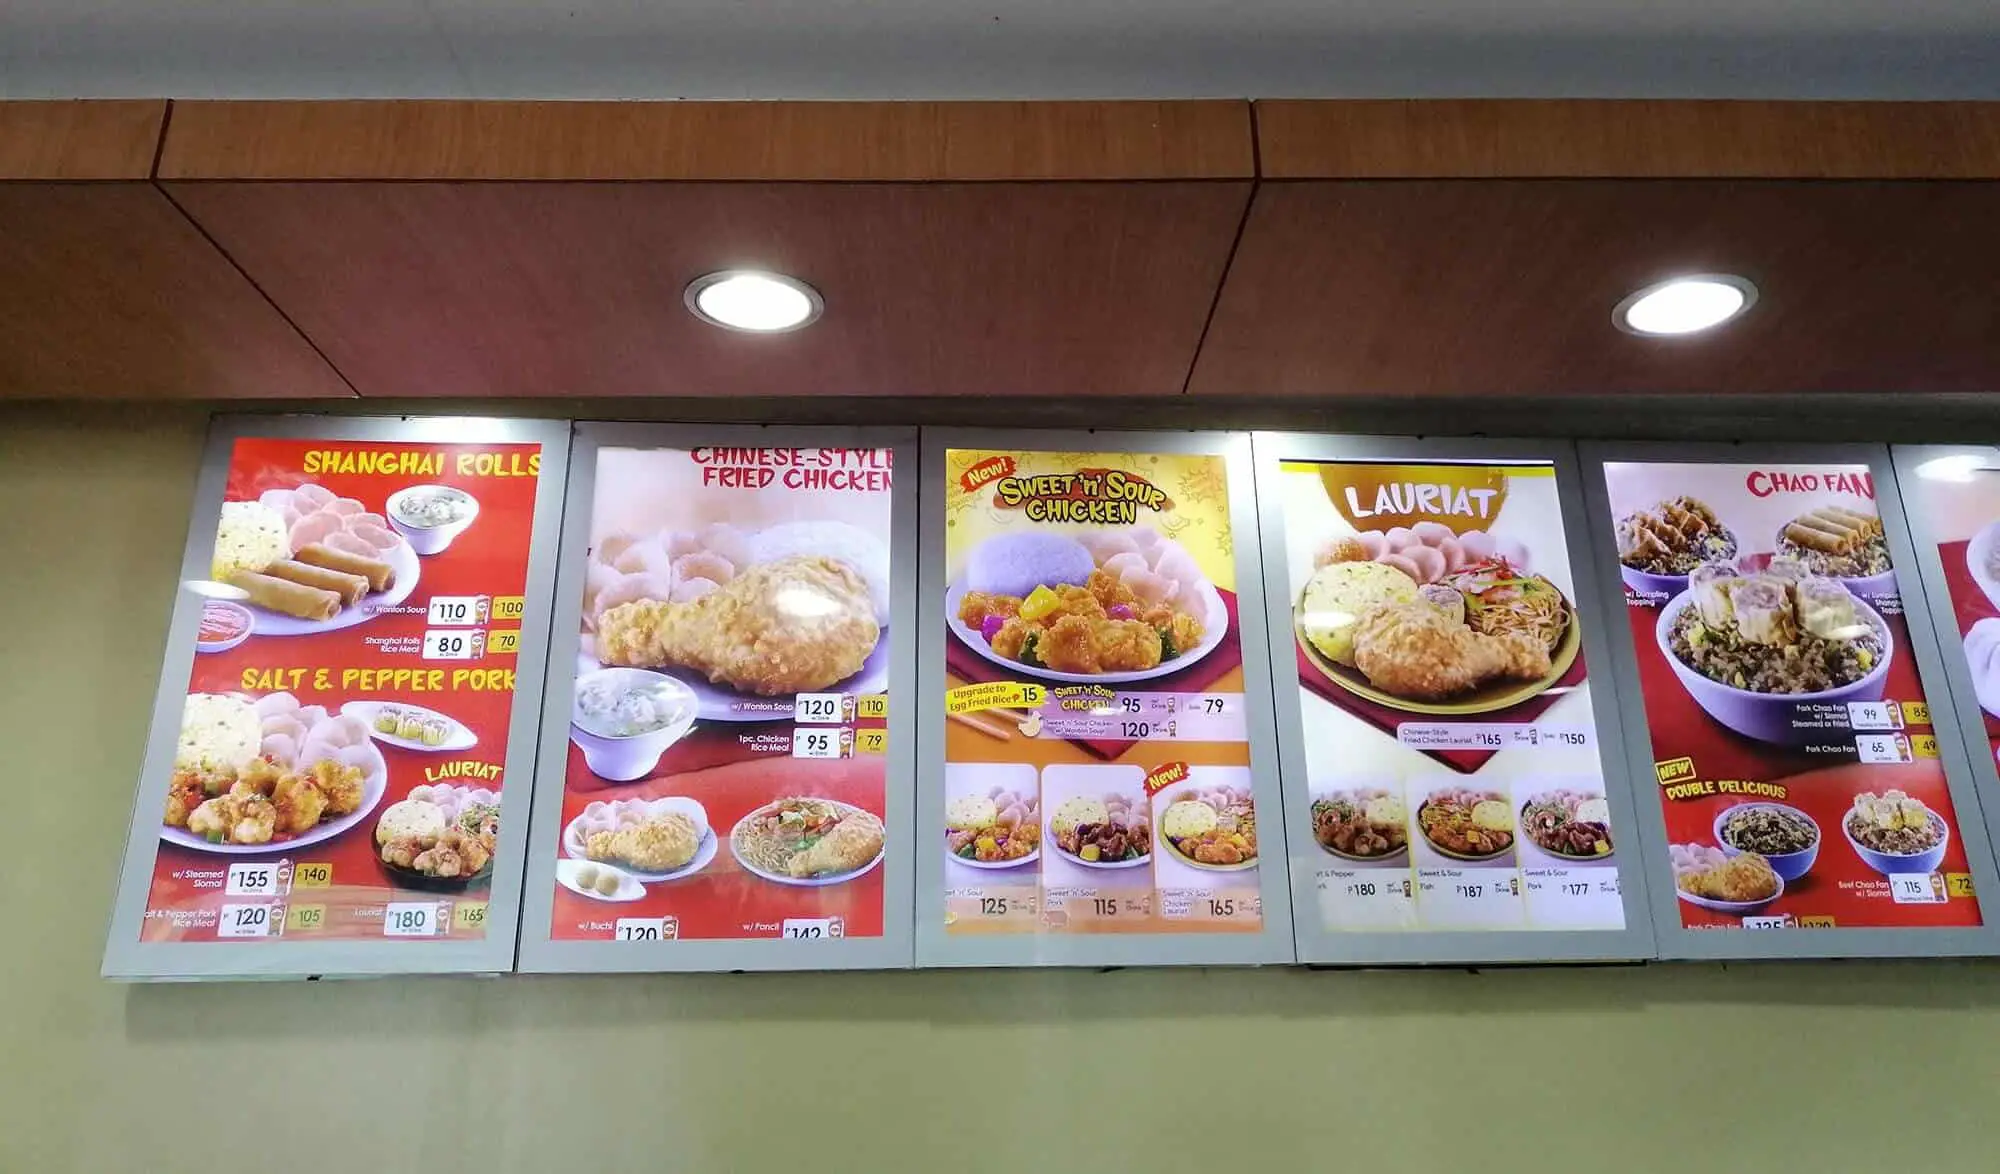 Chinese Fried Chicken, Pork, And Shanghai Rolls At Chowking